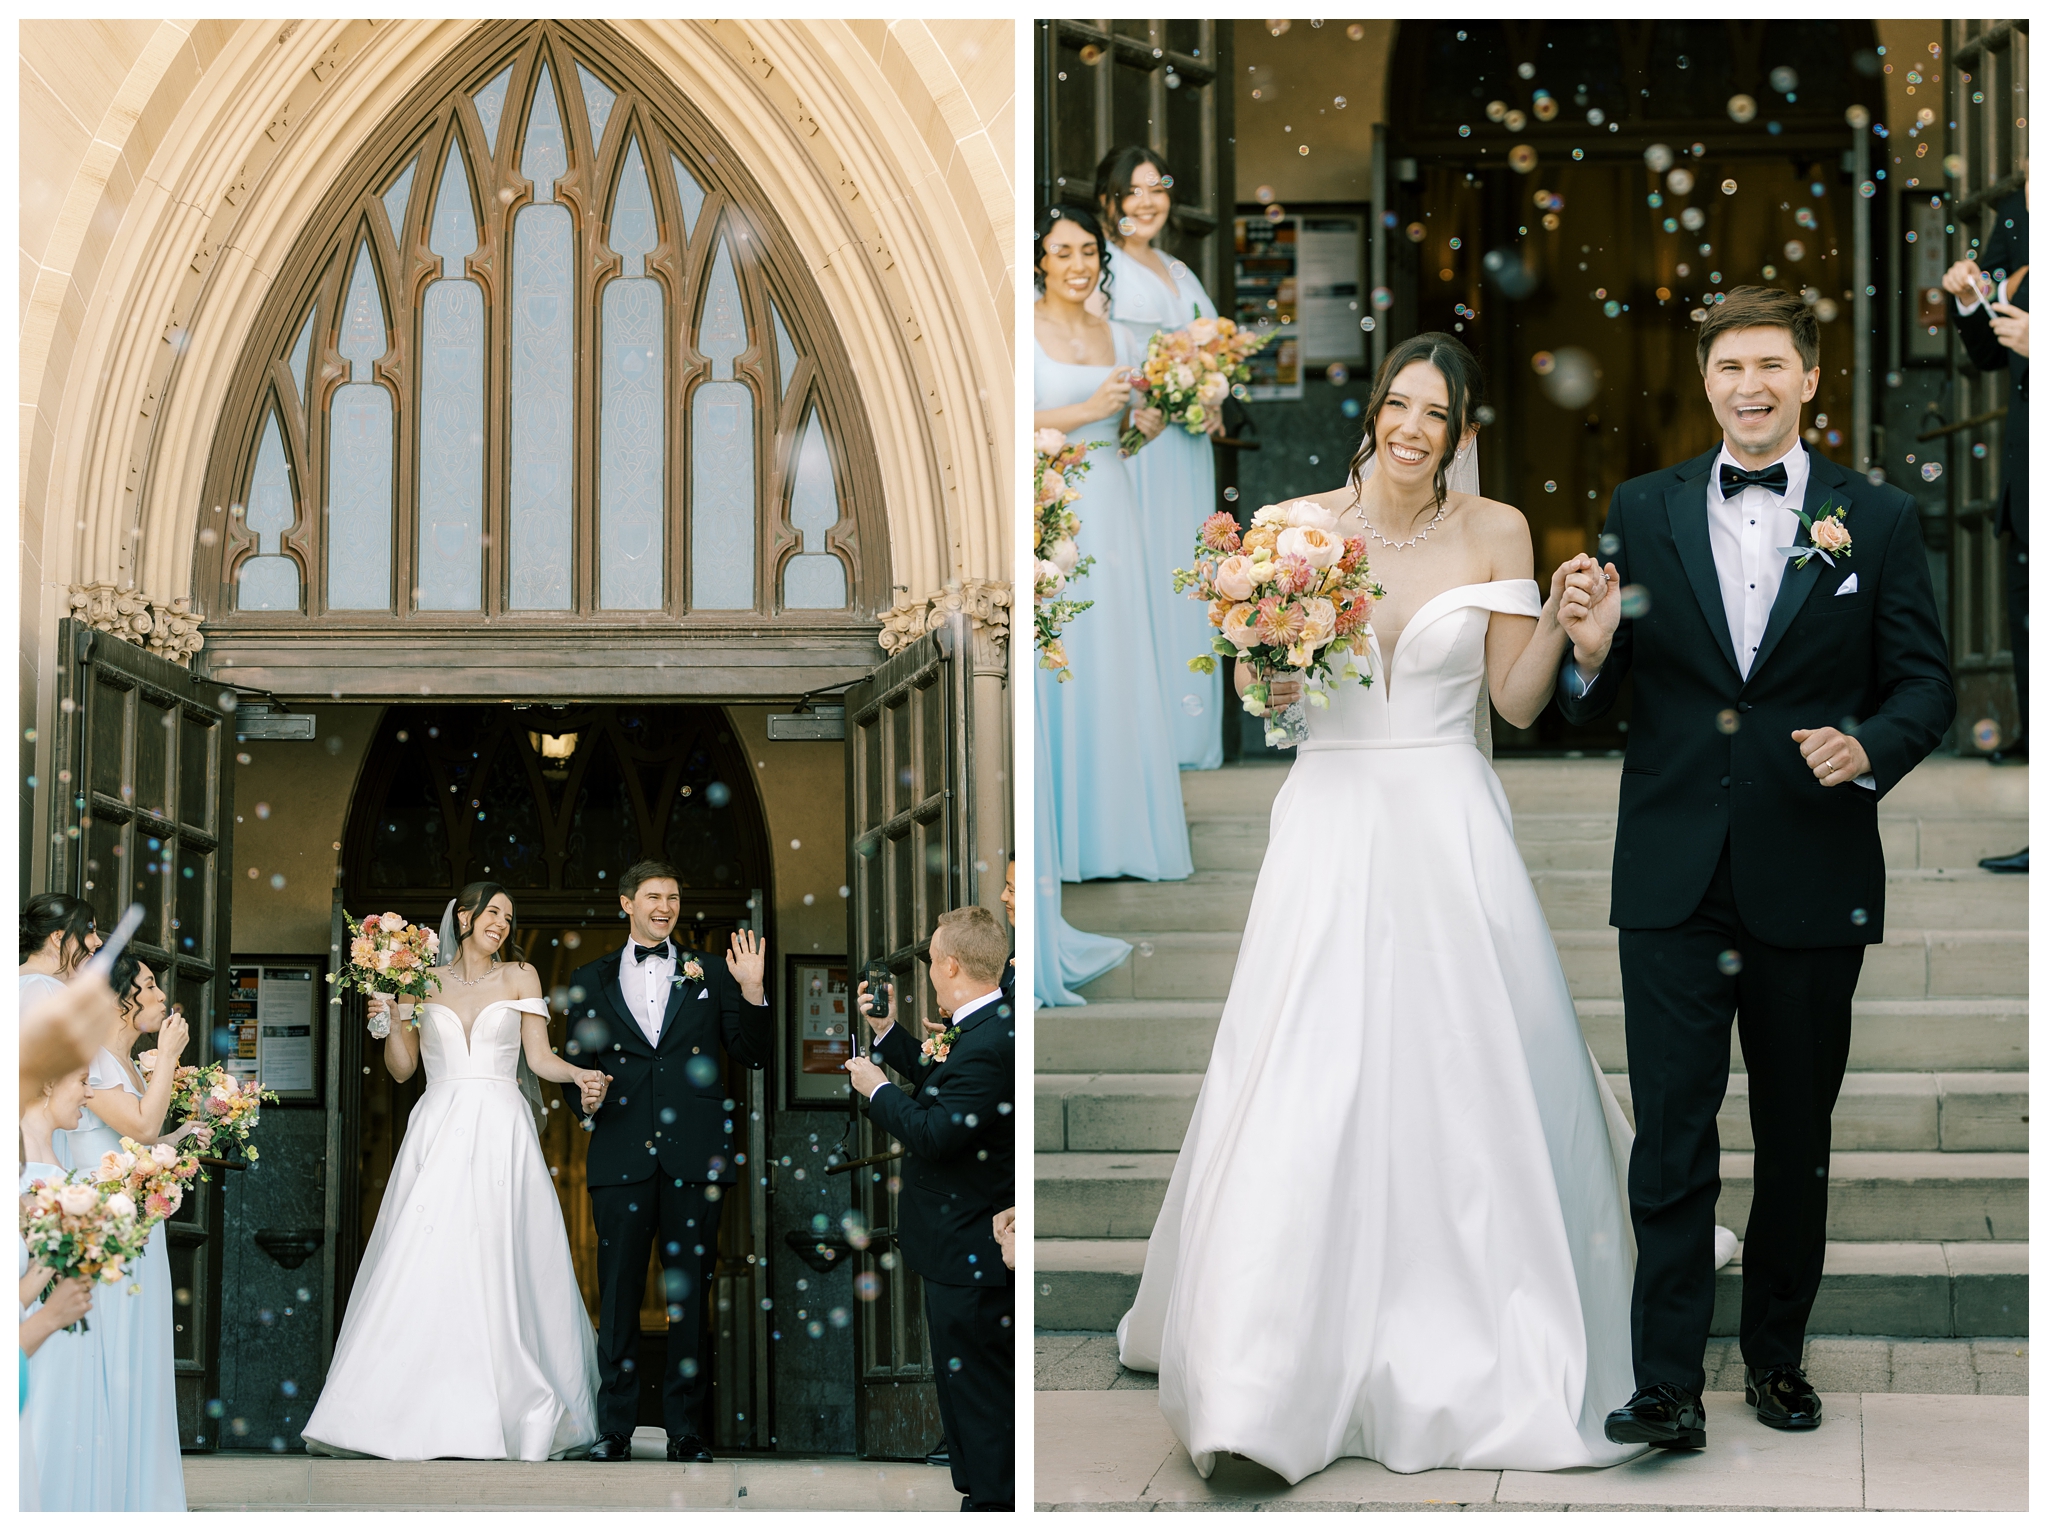 timeless romantic wedding at cascade hills country club near Grand Rapids michigan by josh and Andrea photography